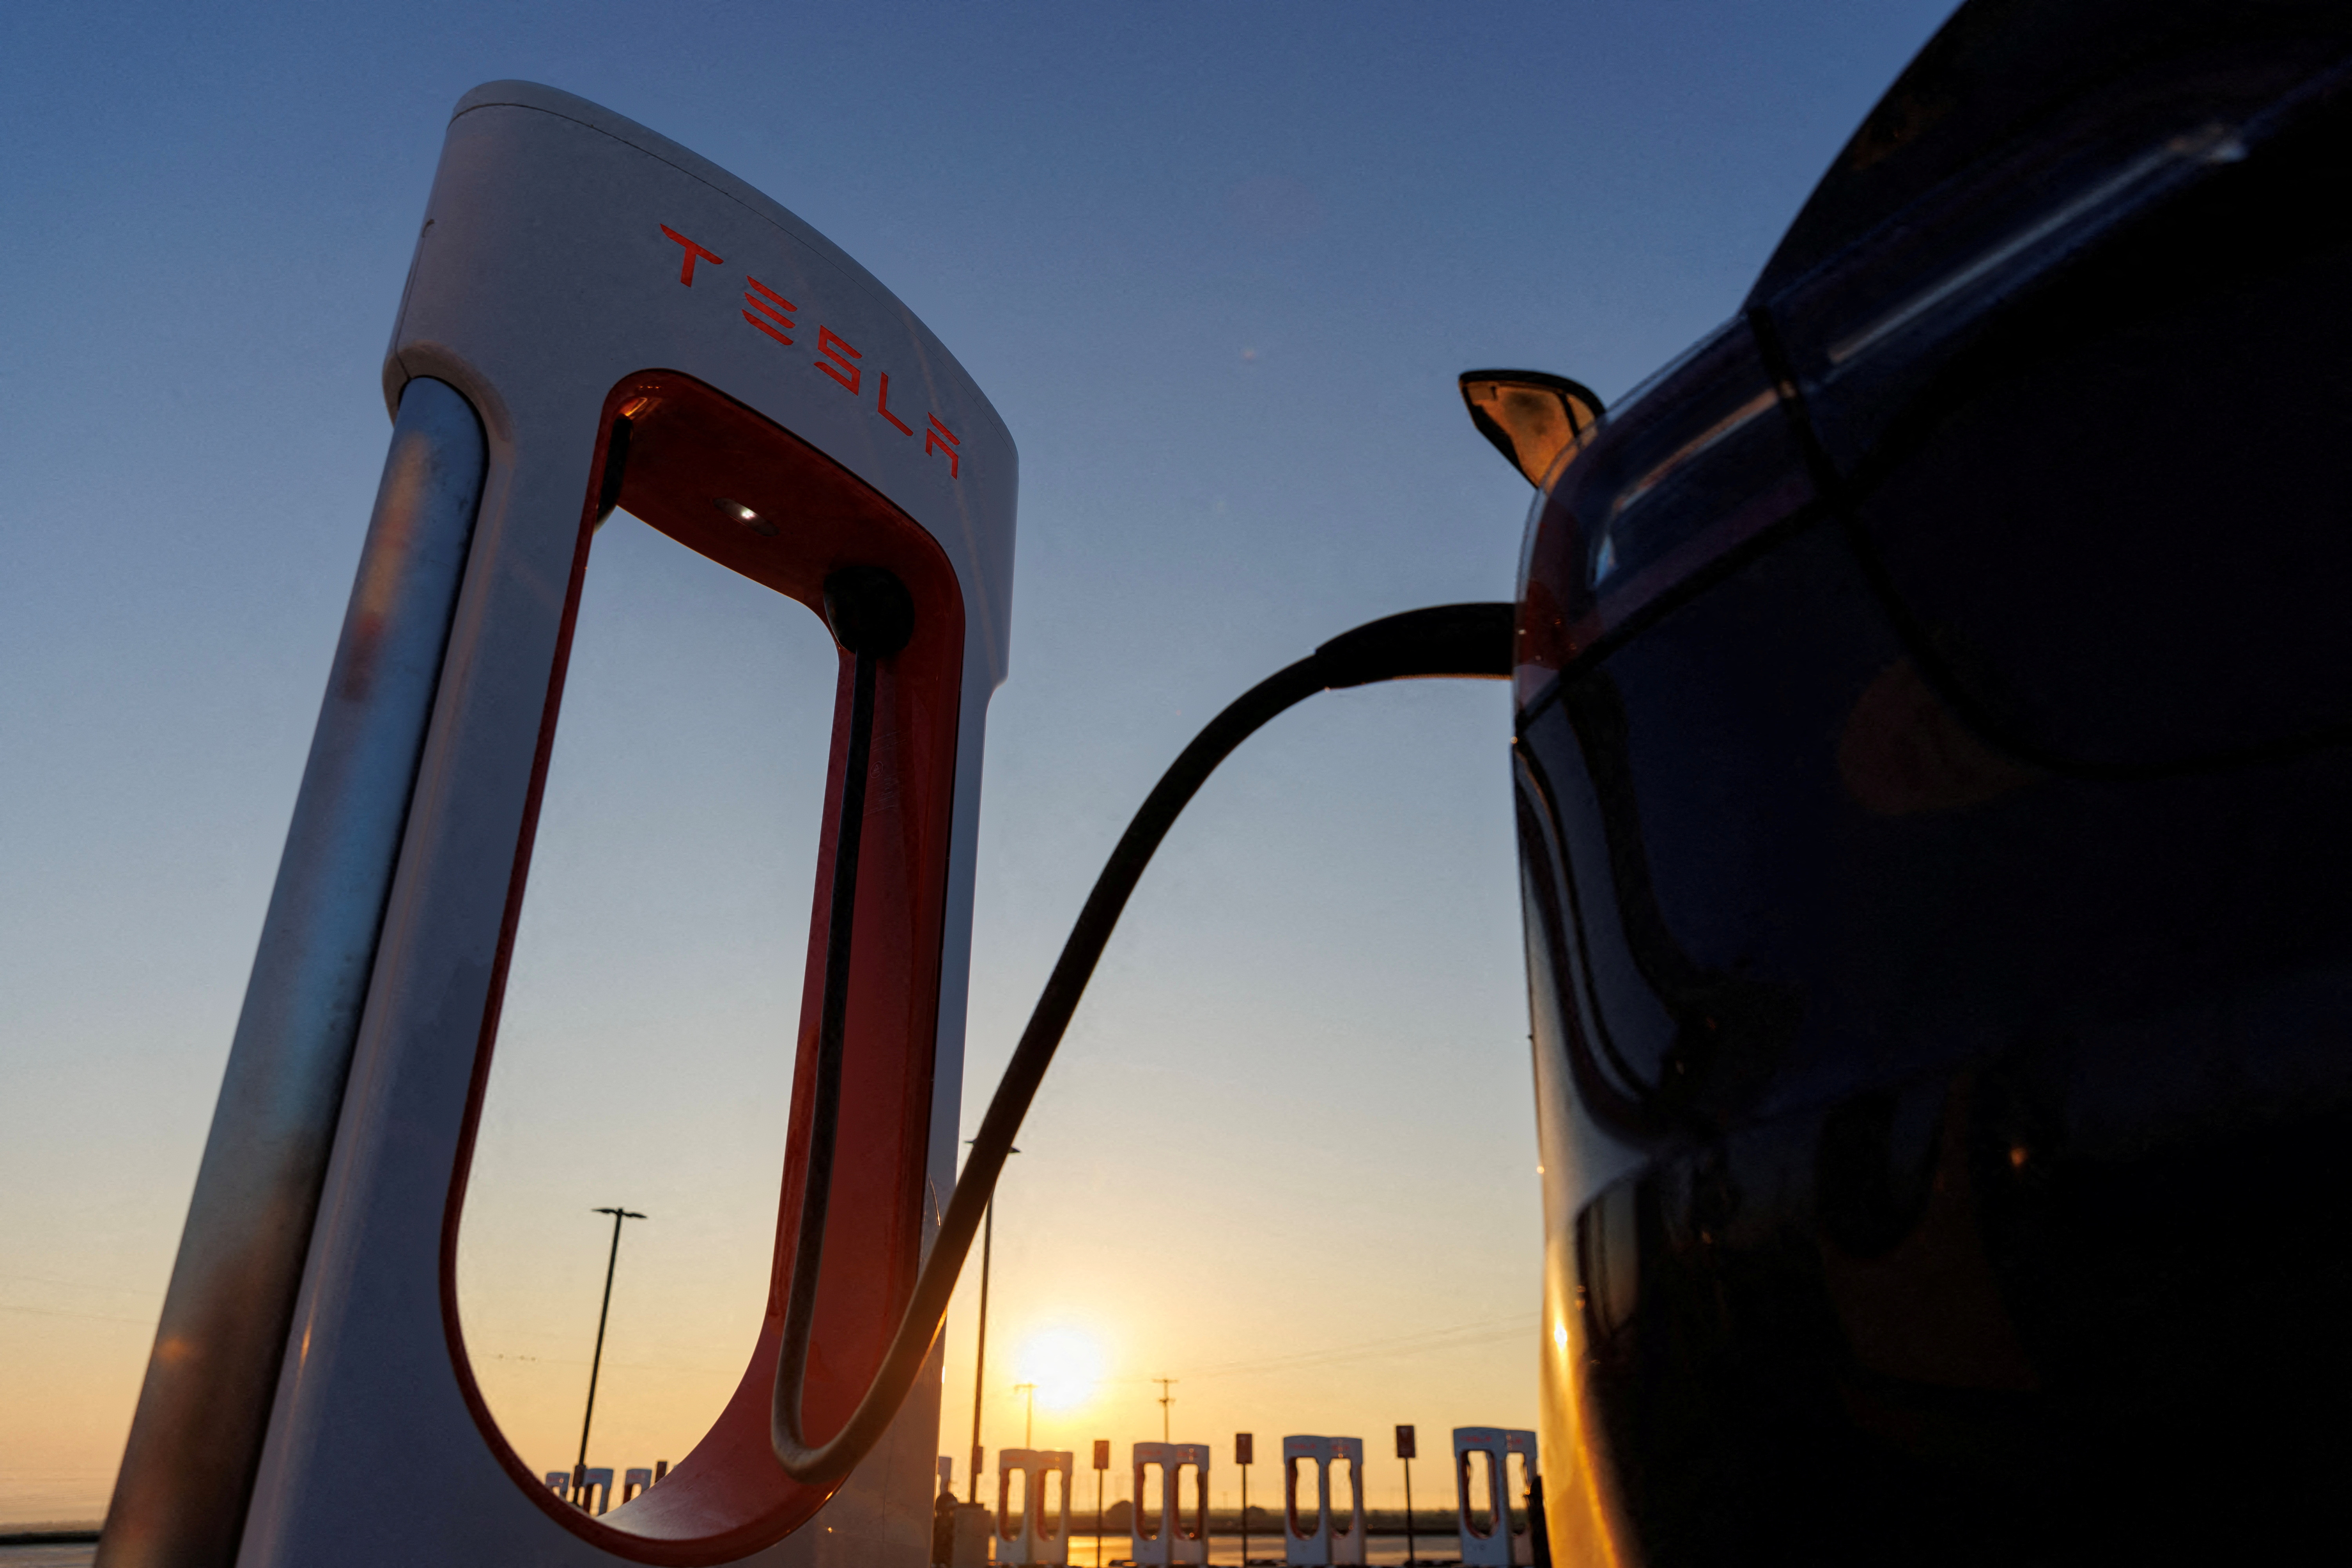 A Tesla supercharging station in California